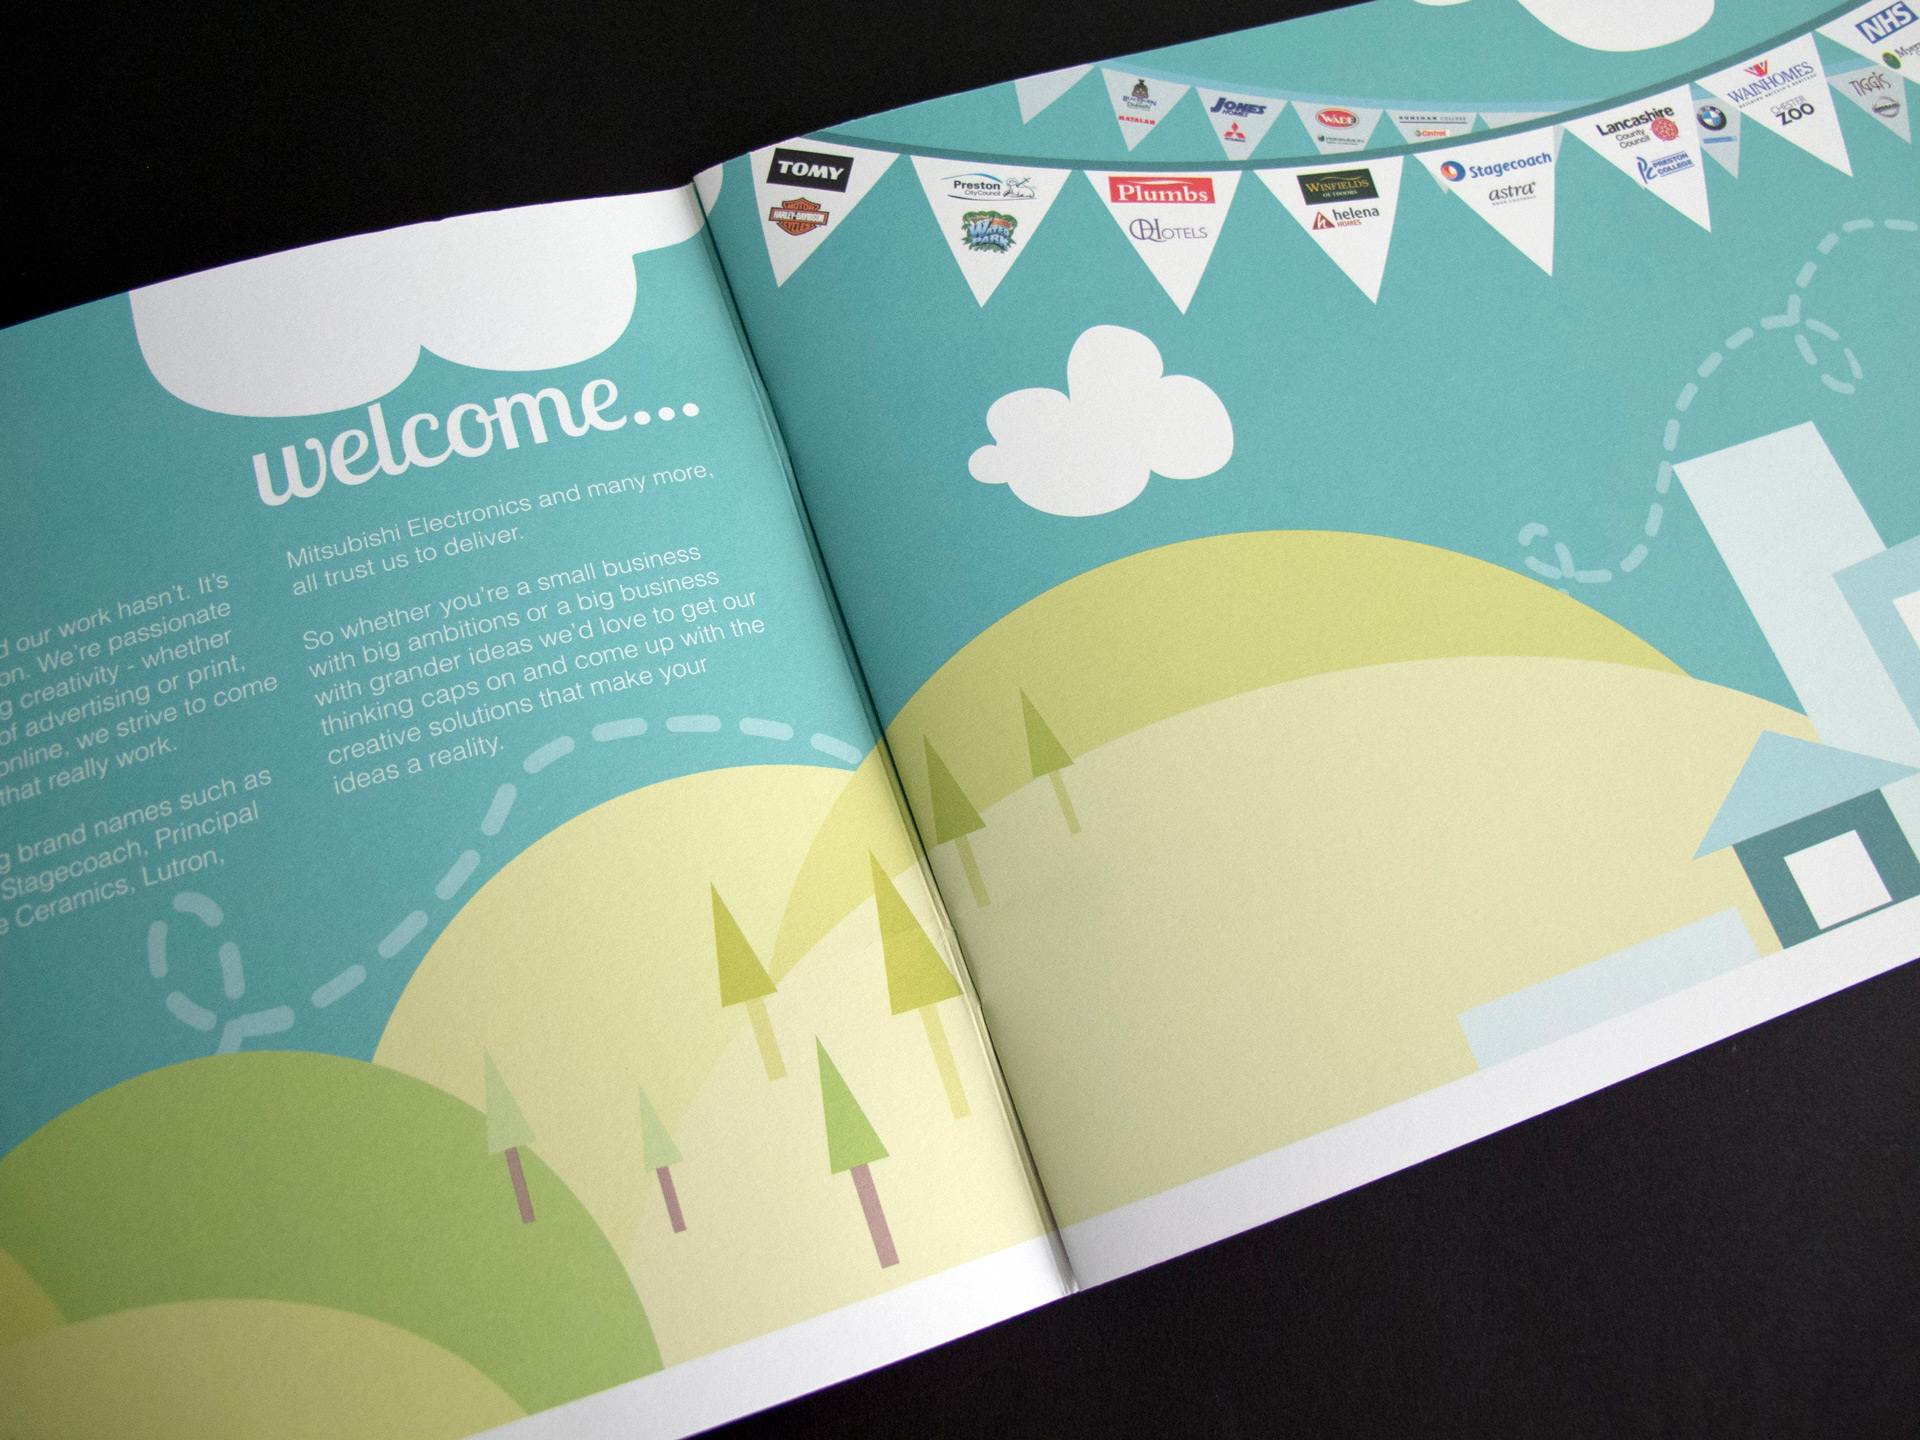 Photo of the brochure welcome pages that are in a vector illustration style. There are green hills with trees and a blue sky that span both pages. On the right page, the sky is filled with bunting depicting Heckford's client logos. 